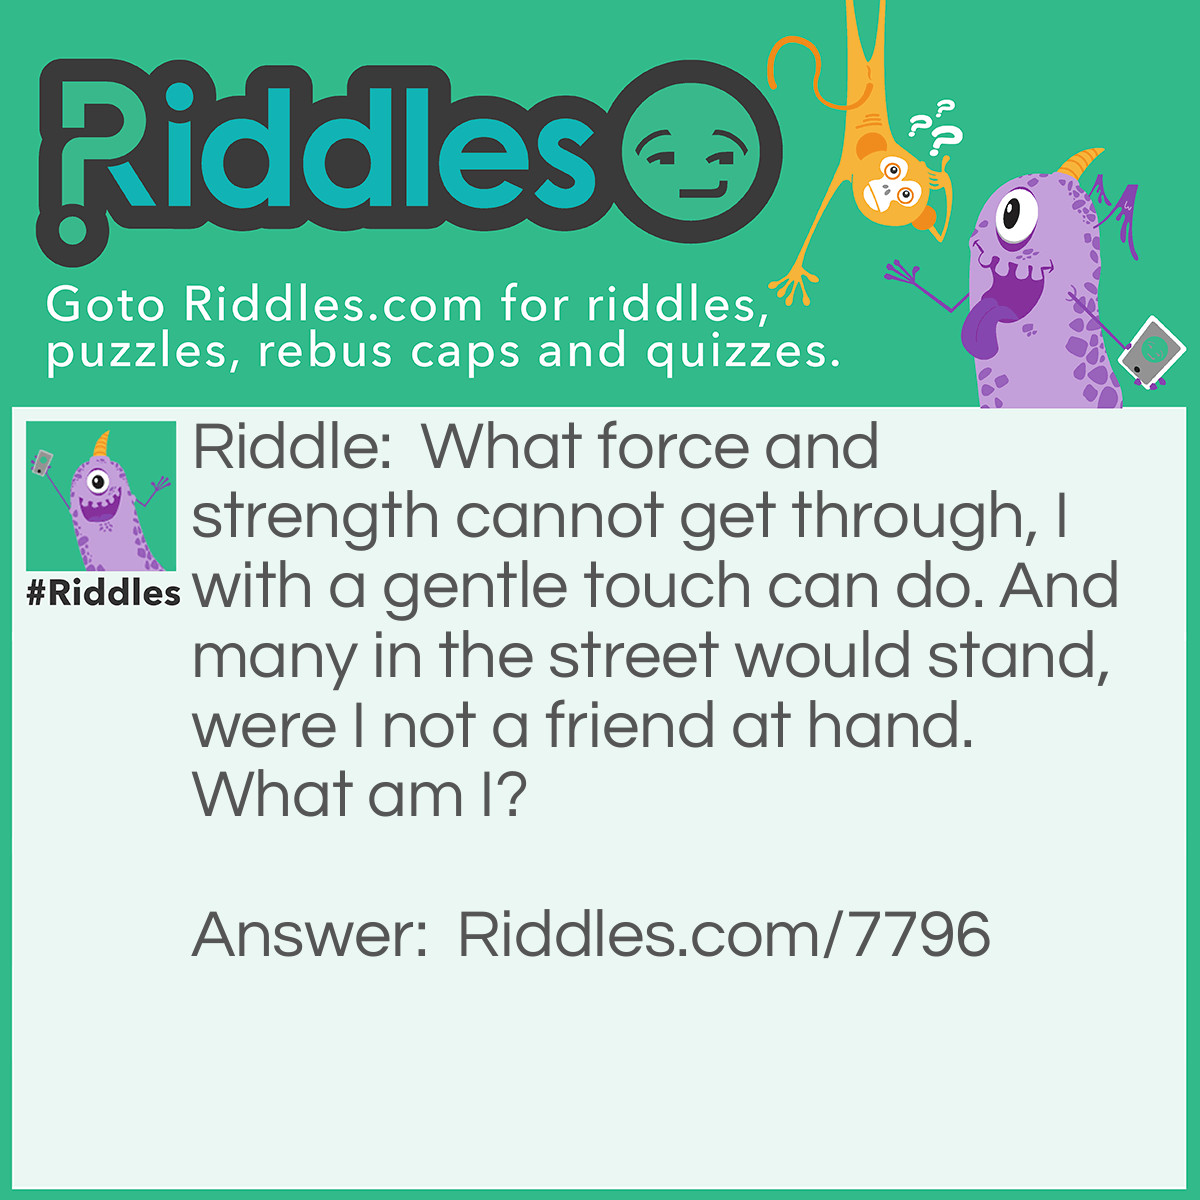 Riddle: What force and strength cannot get through, I with a gentle touch can do. And many in the street would stand, were I not a friend at hand. What am I? Answer: A Key